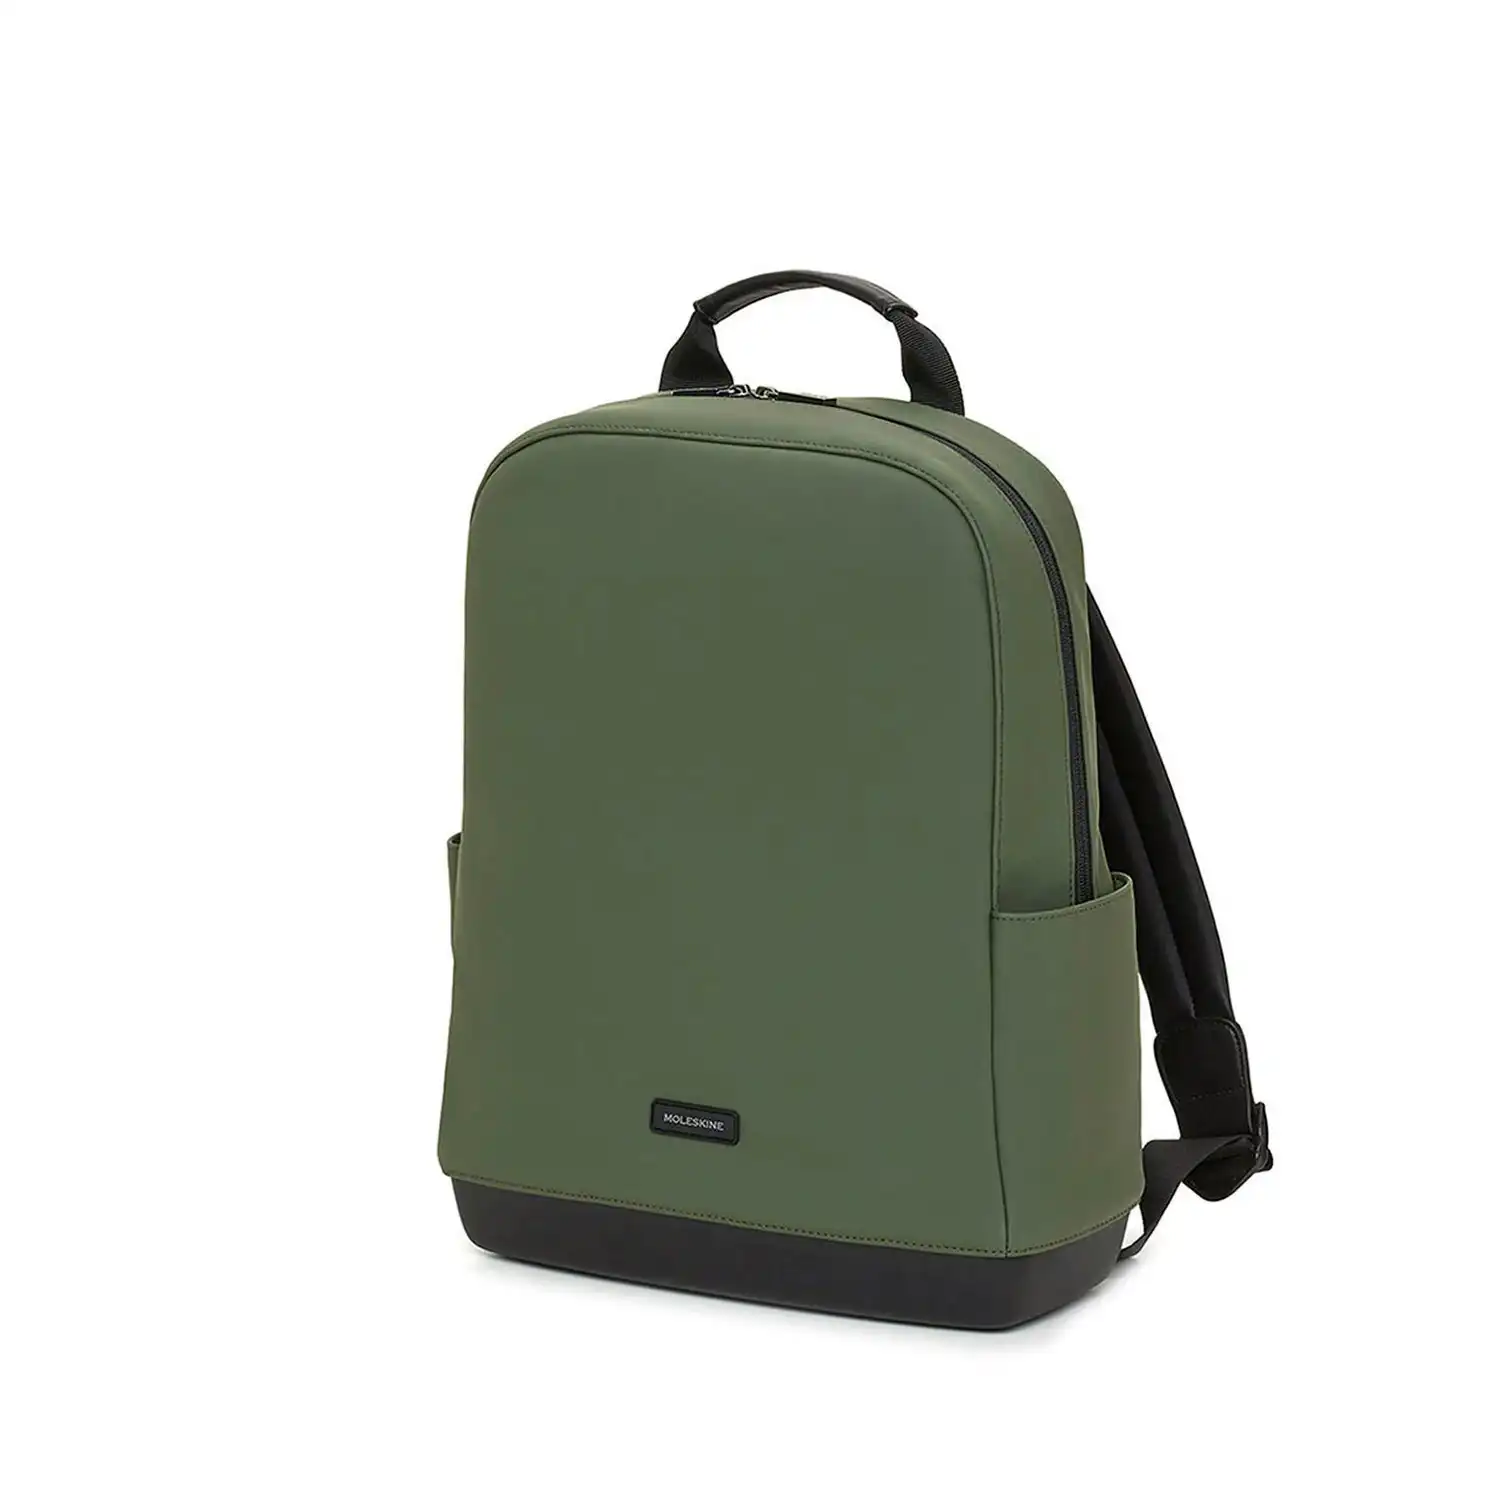 Moleskine The Backpack Collection 15" Soft Touch Lightweight Bag Forest Green